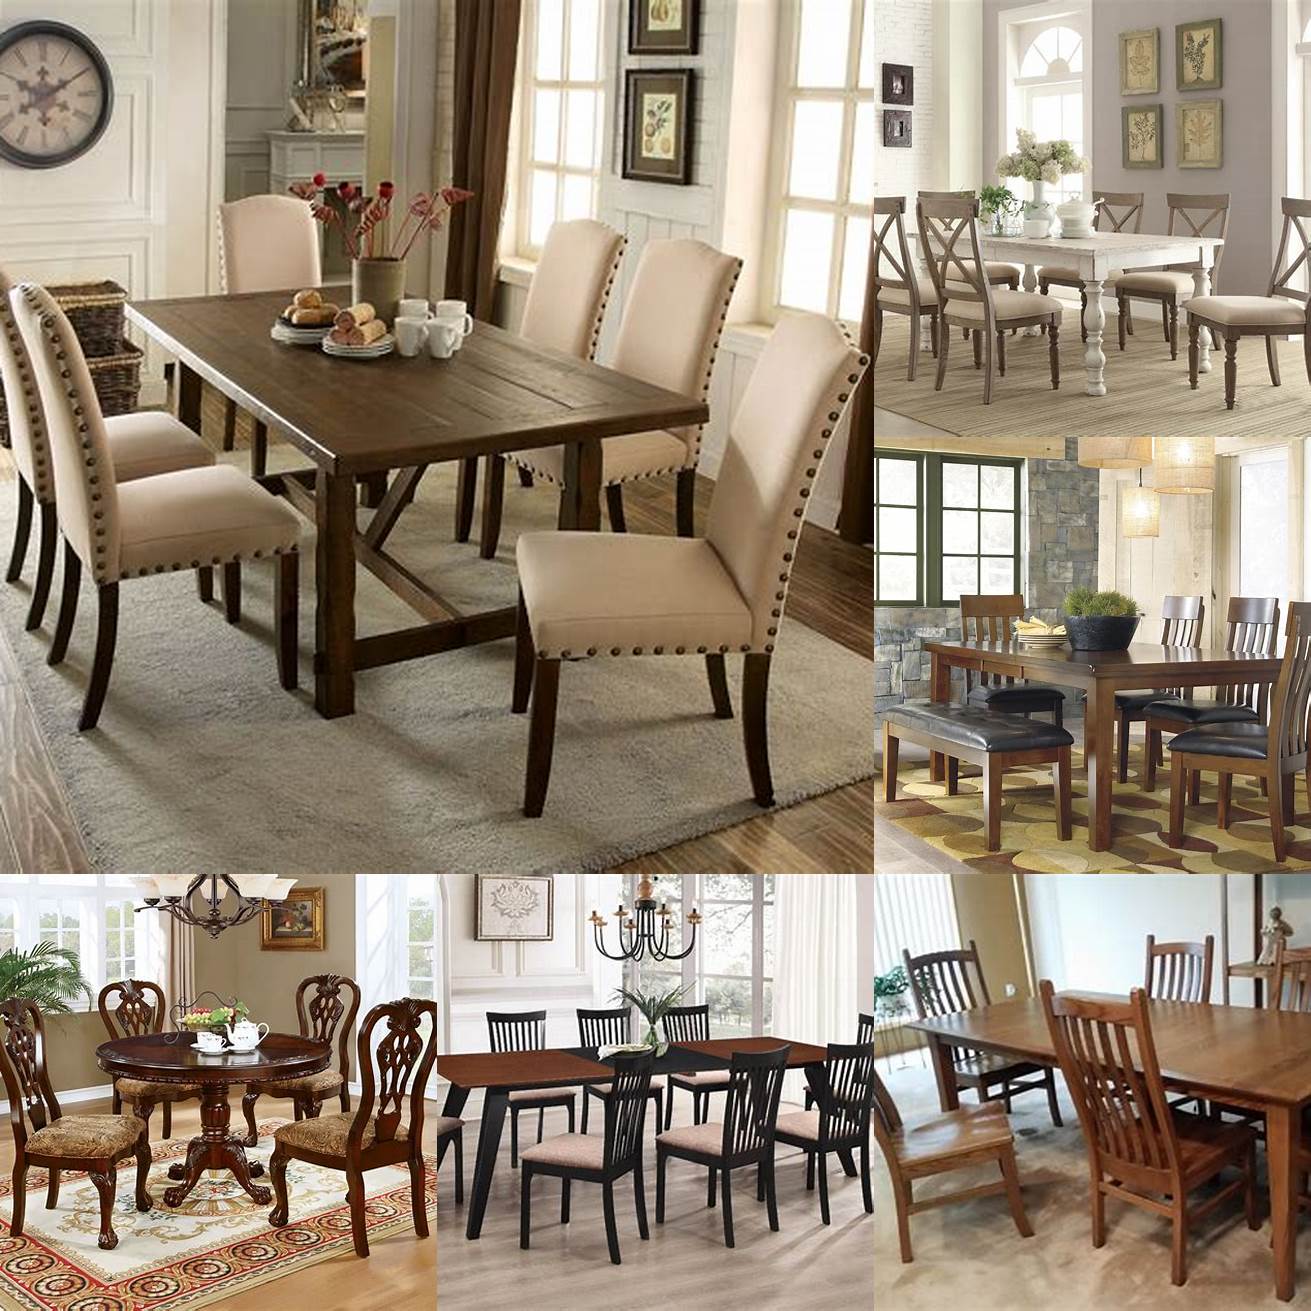 Style of Dining Set